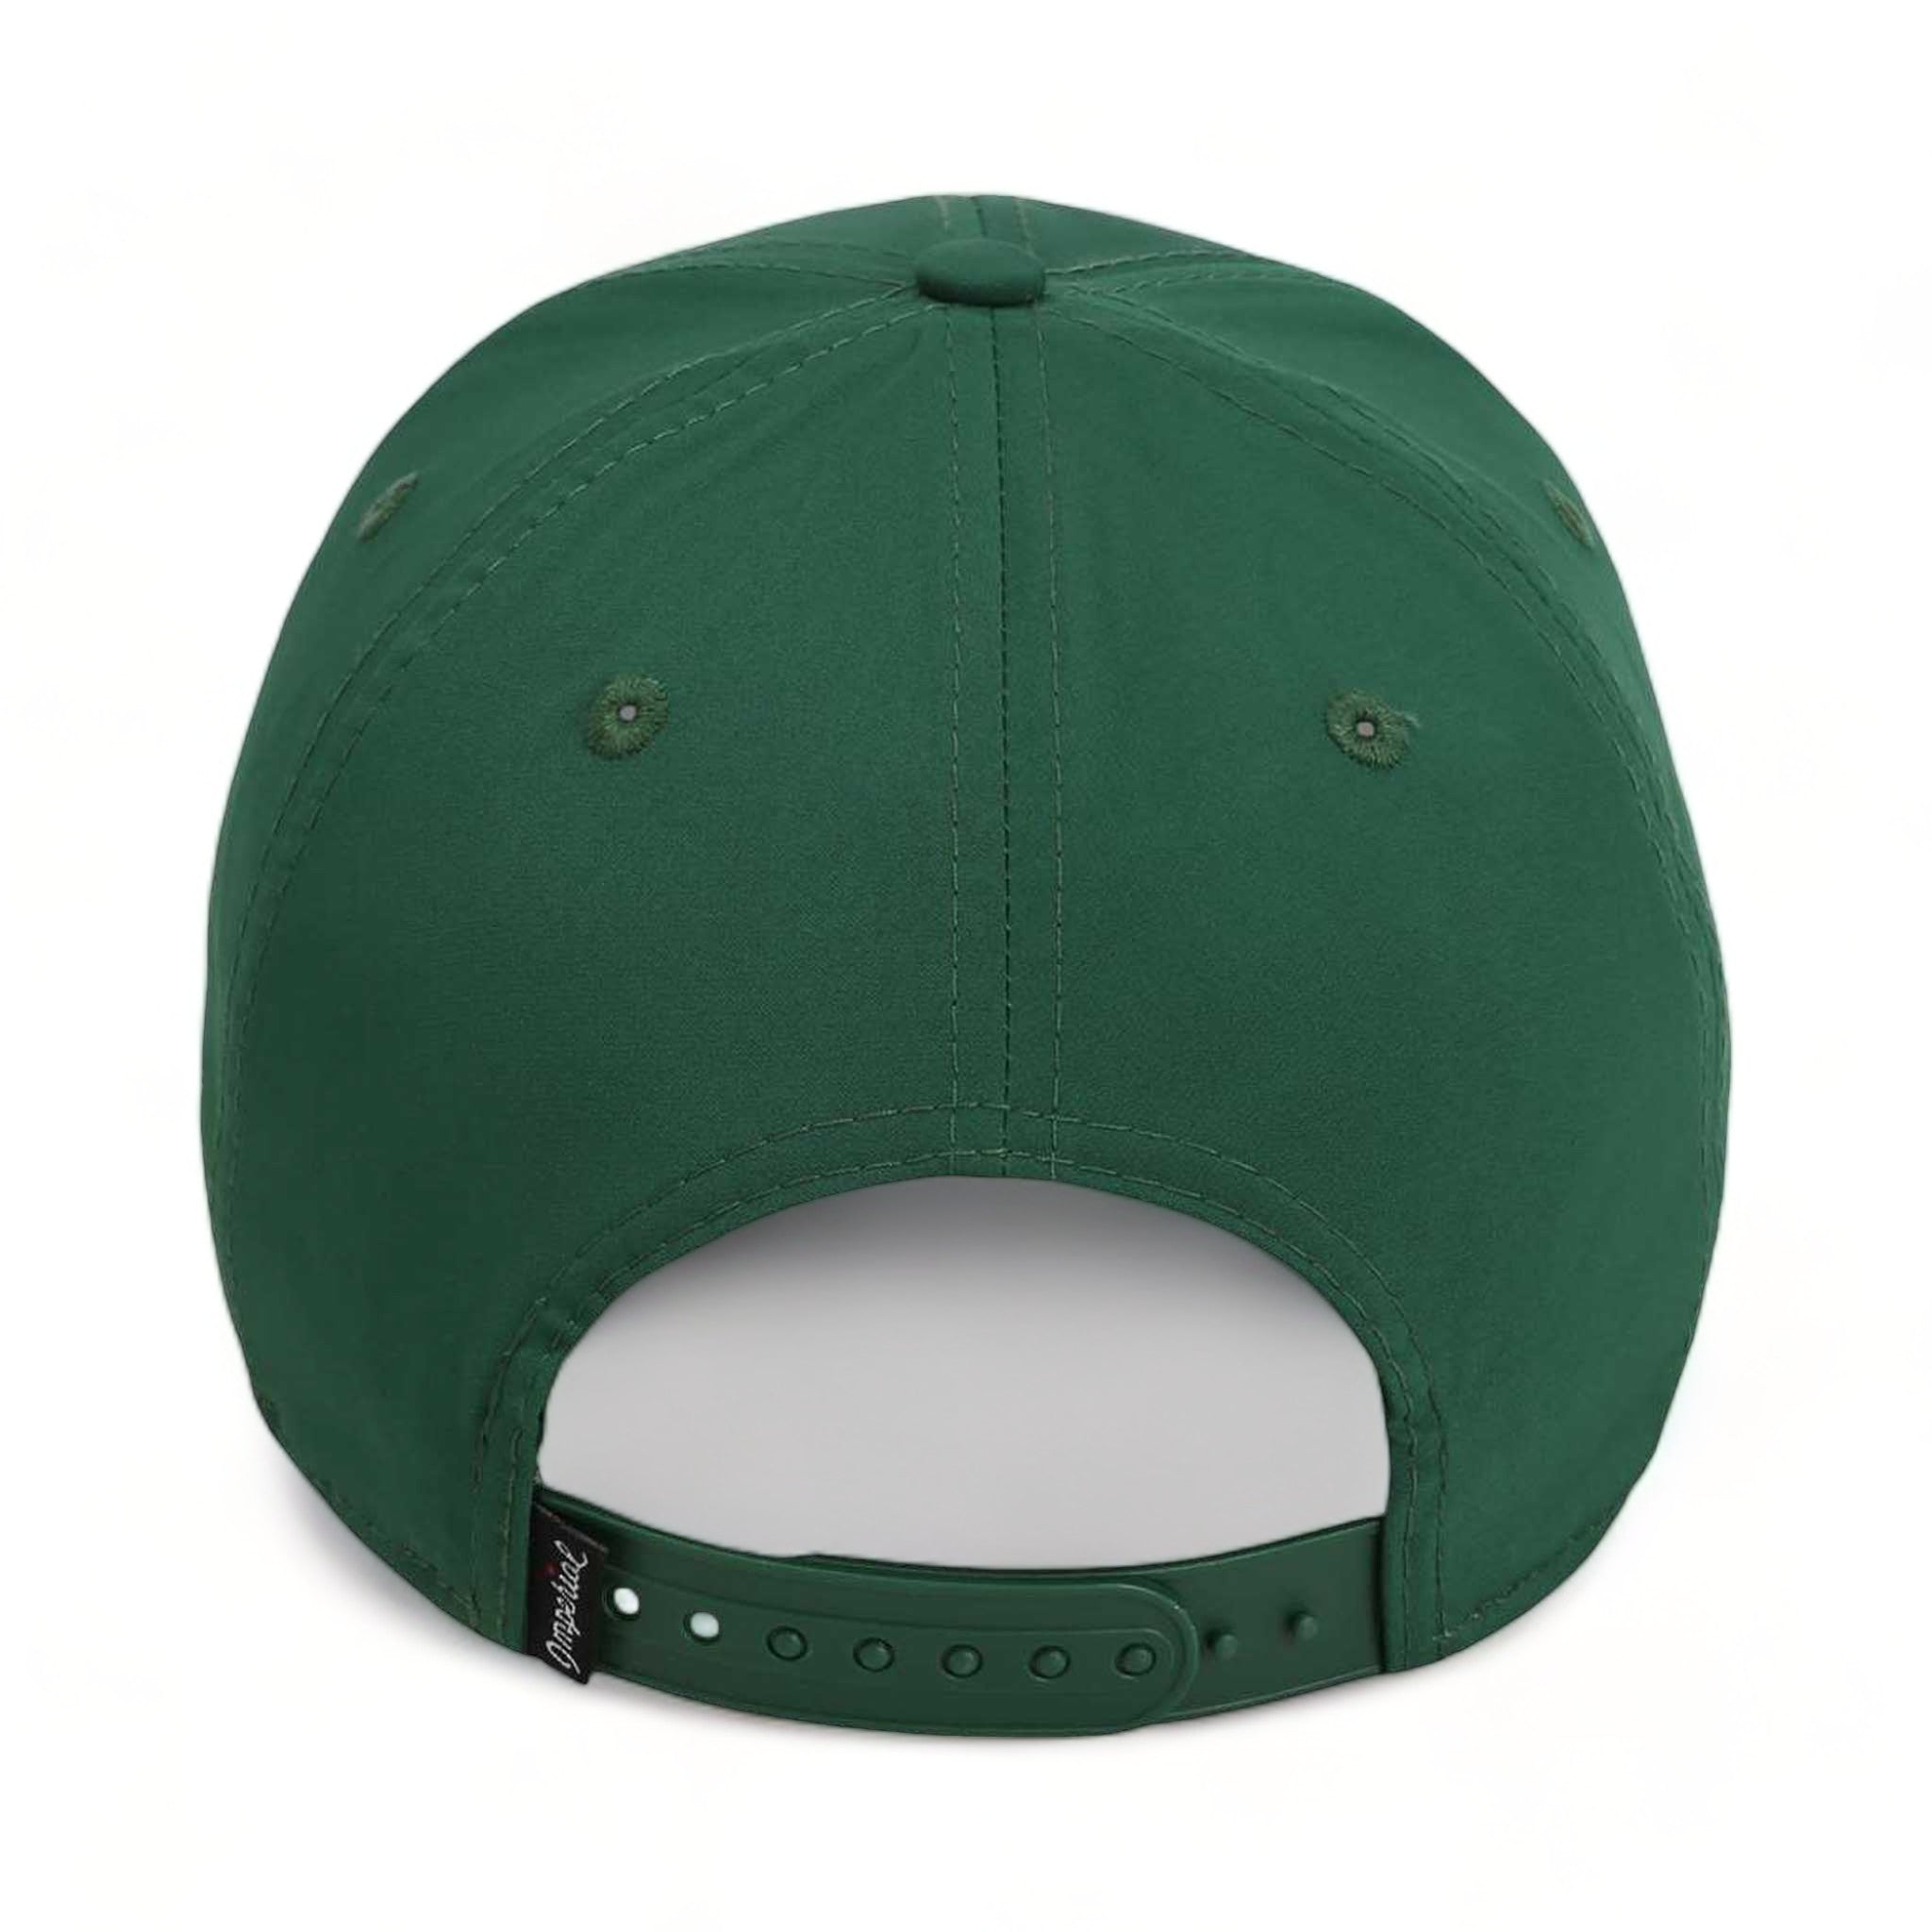 Back view of Imperial 7054 custom hat in forest and white